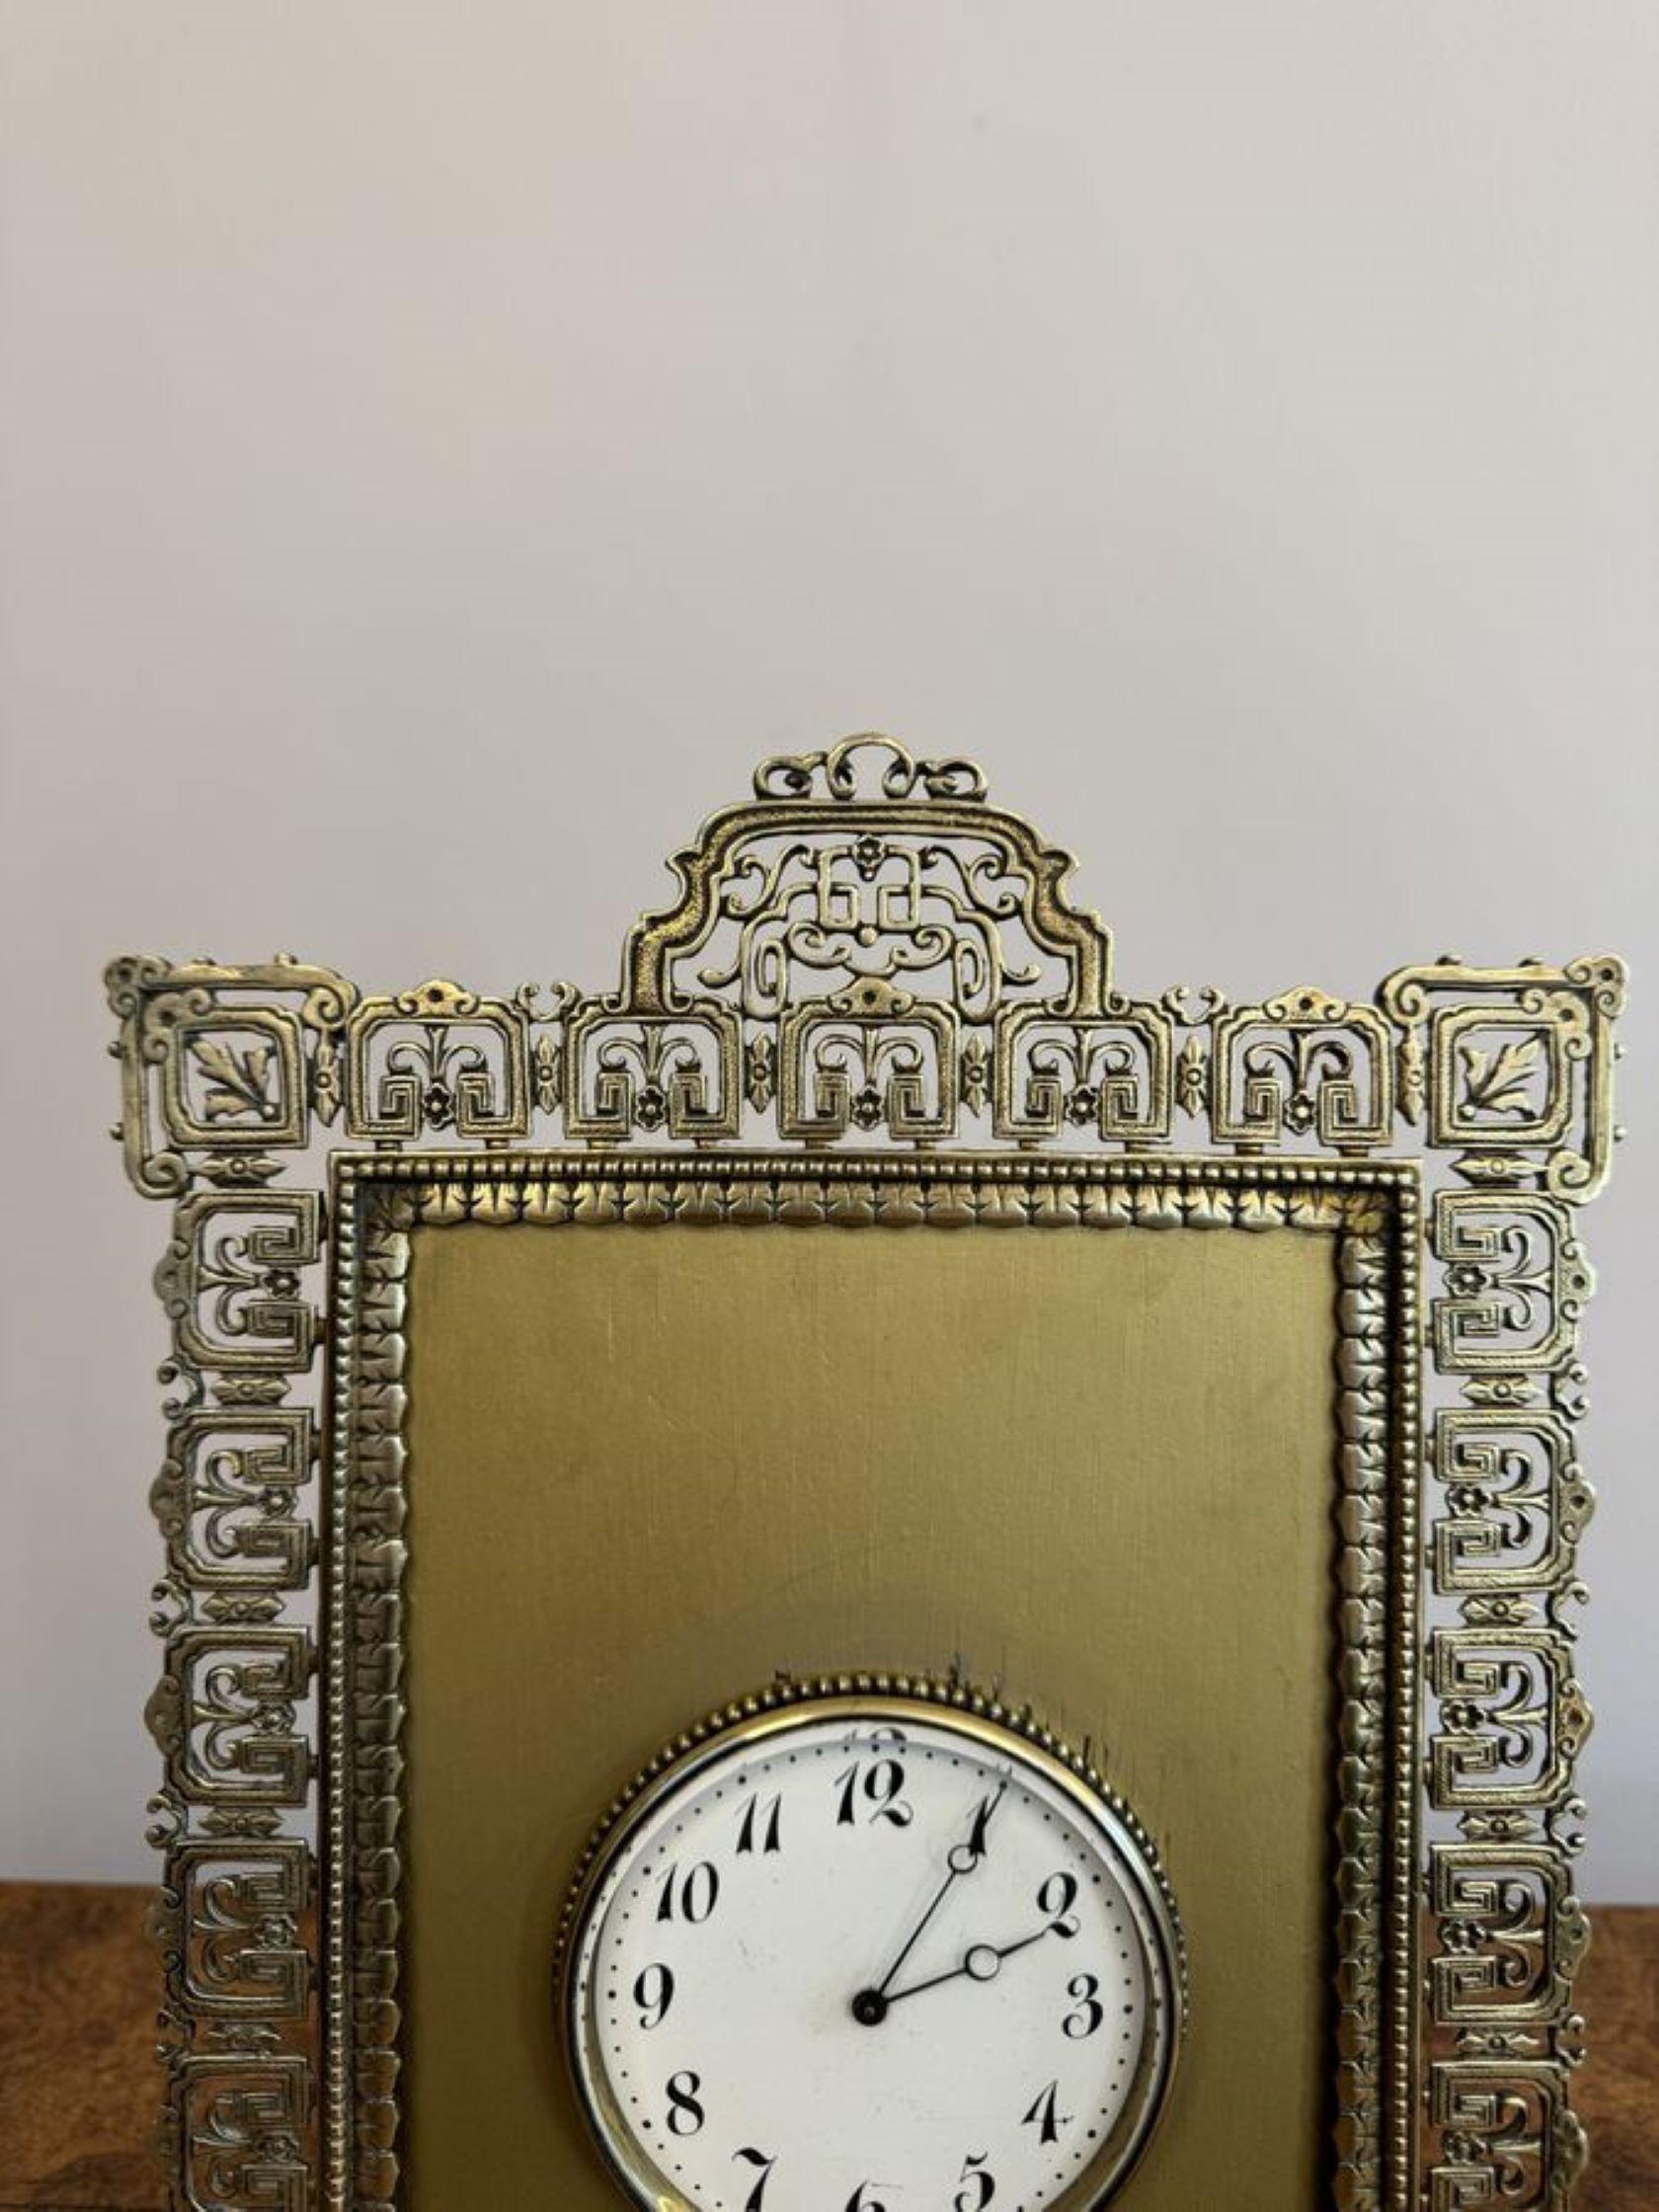 Elegant quality antique Victorian ornate brass desk clock, having a quality ornate brass frame with a circular dial to the centre with the original hands and an eight day movement. 

D. 1880